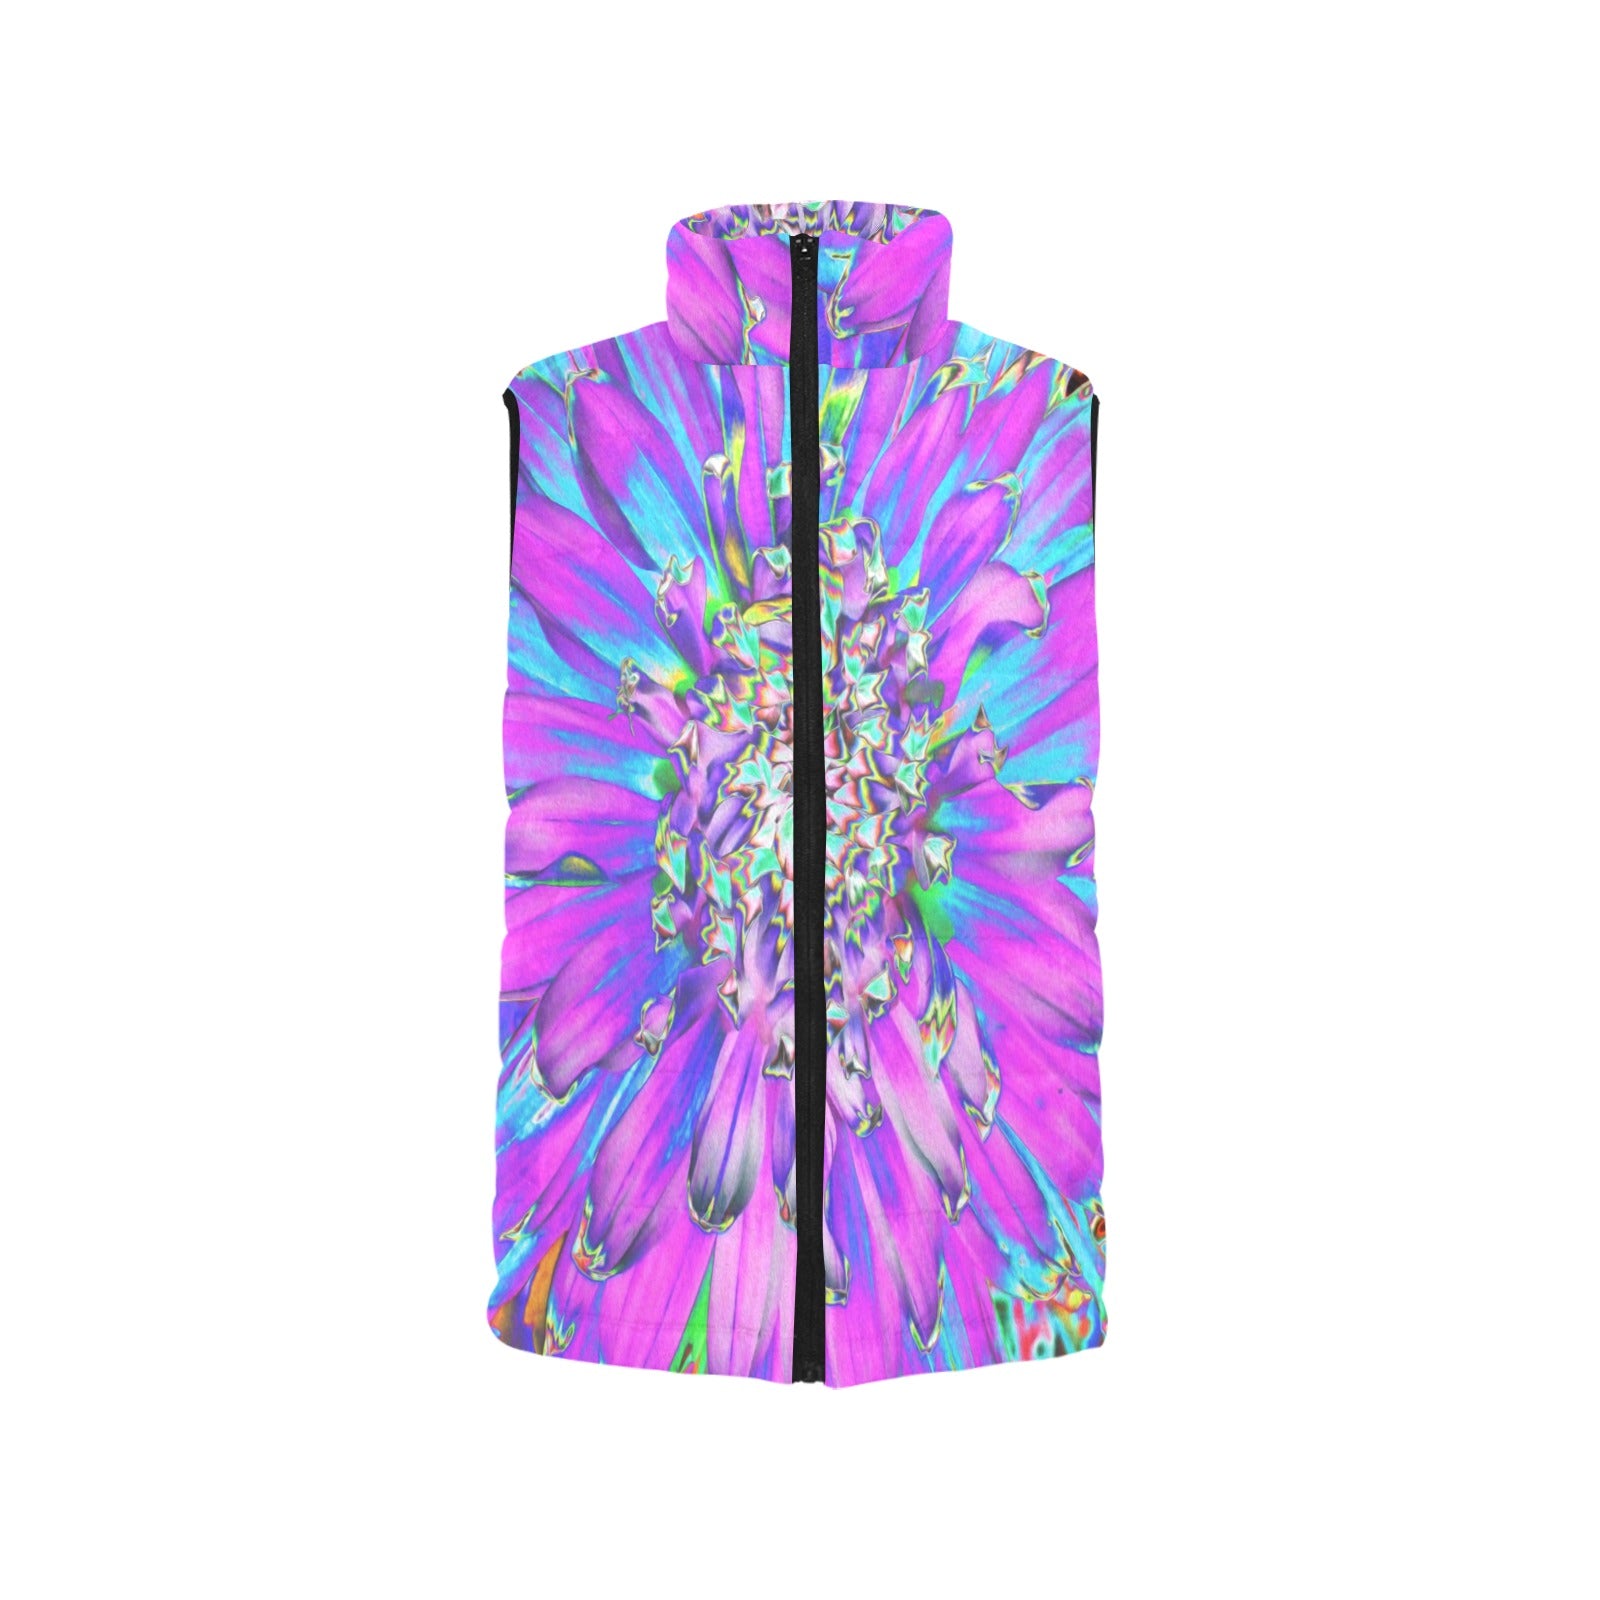 Women's Stand Collar Vest, Trippy Abstract Aqua, Lime Green and Purple Dahlia